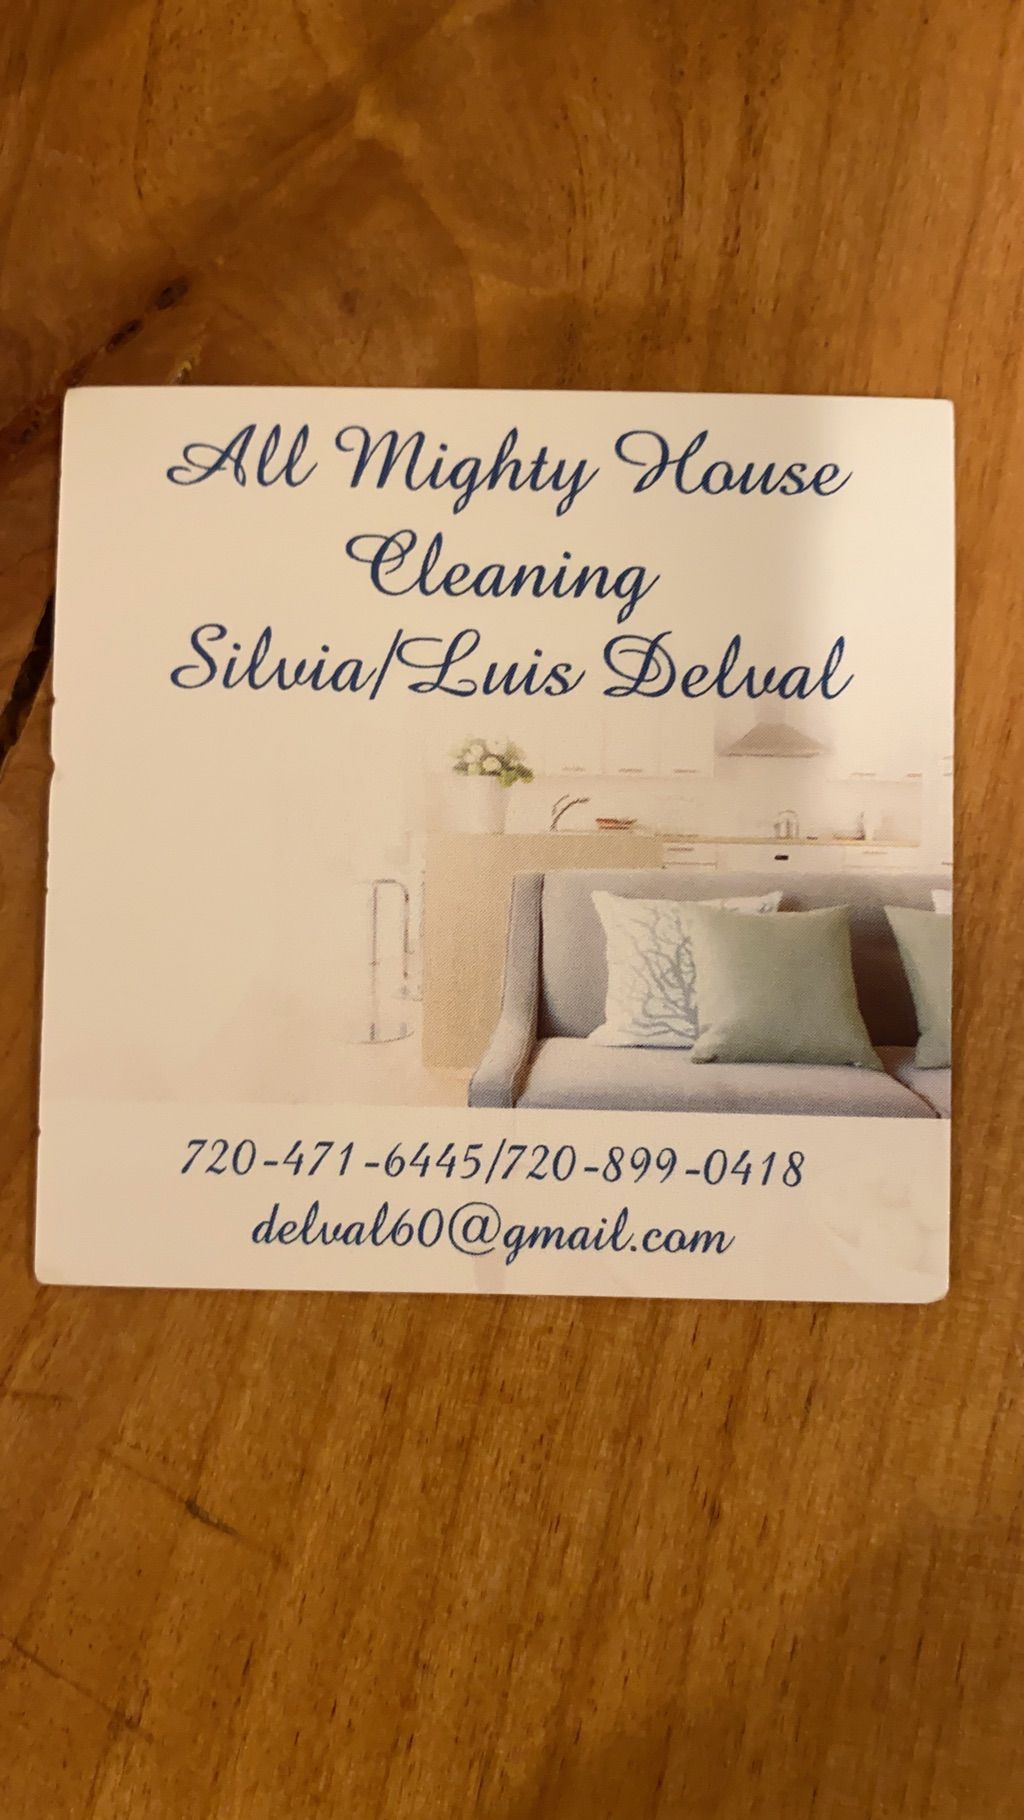 All Mighty House Cleaning!